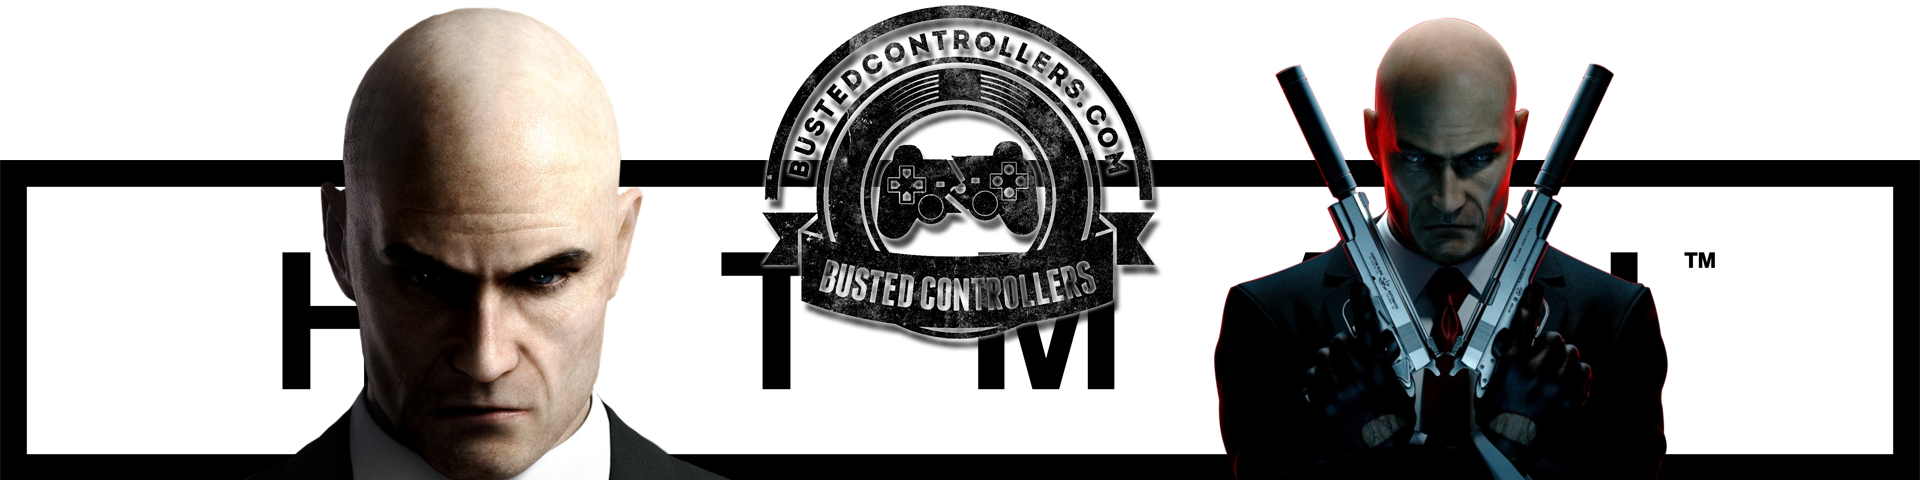 BustedControllers.com